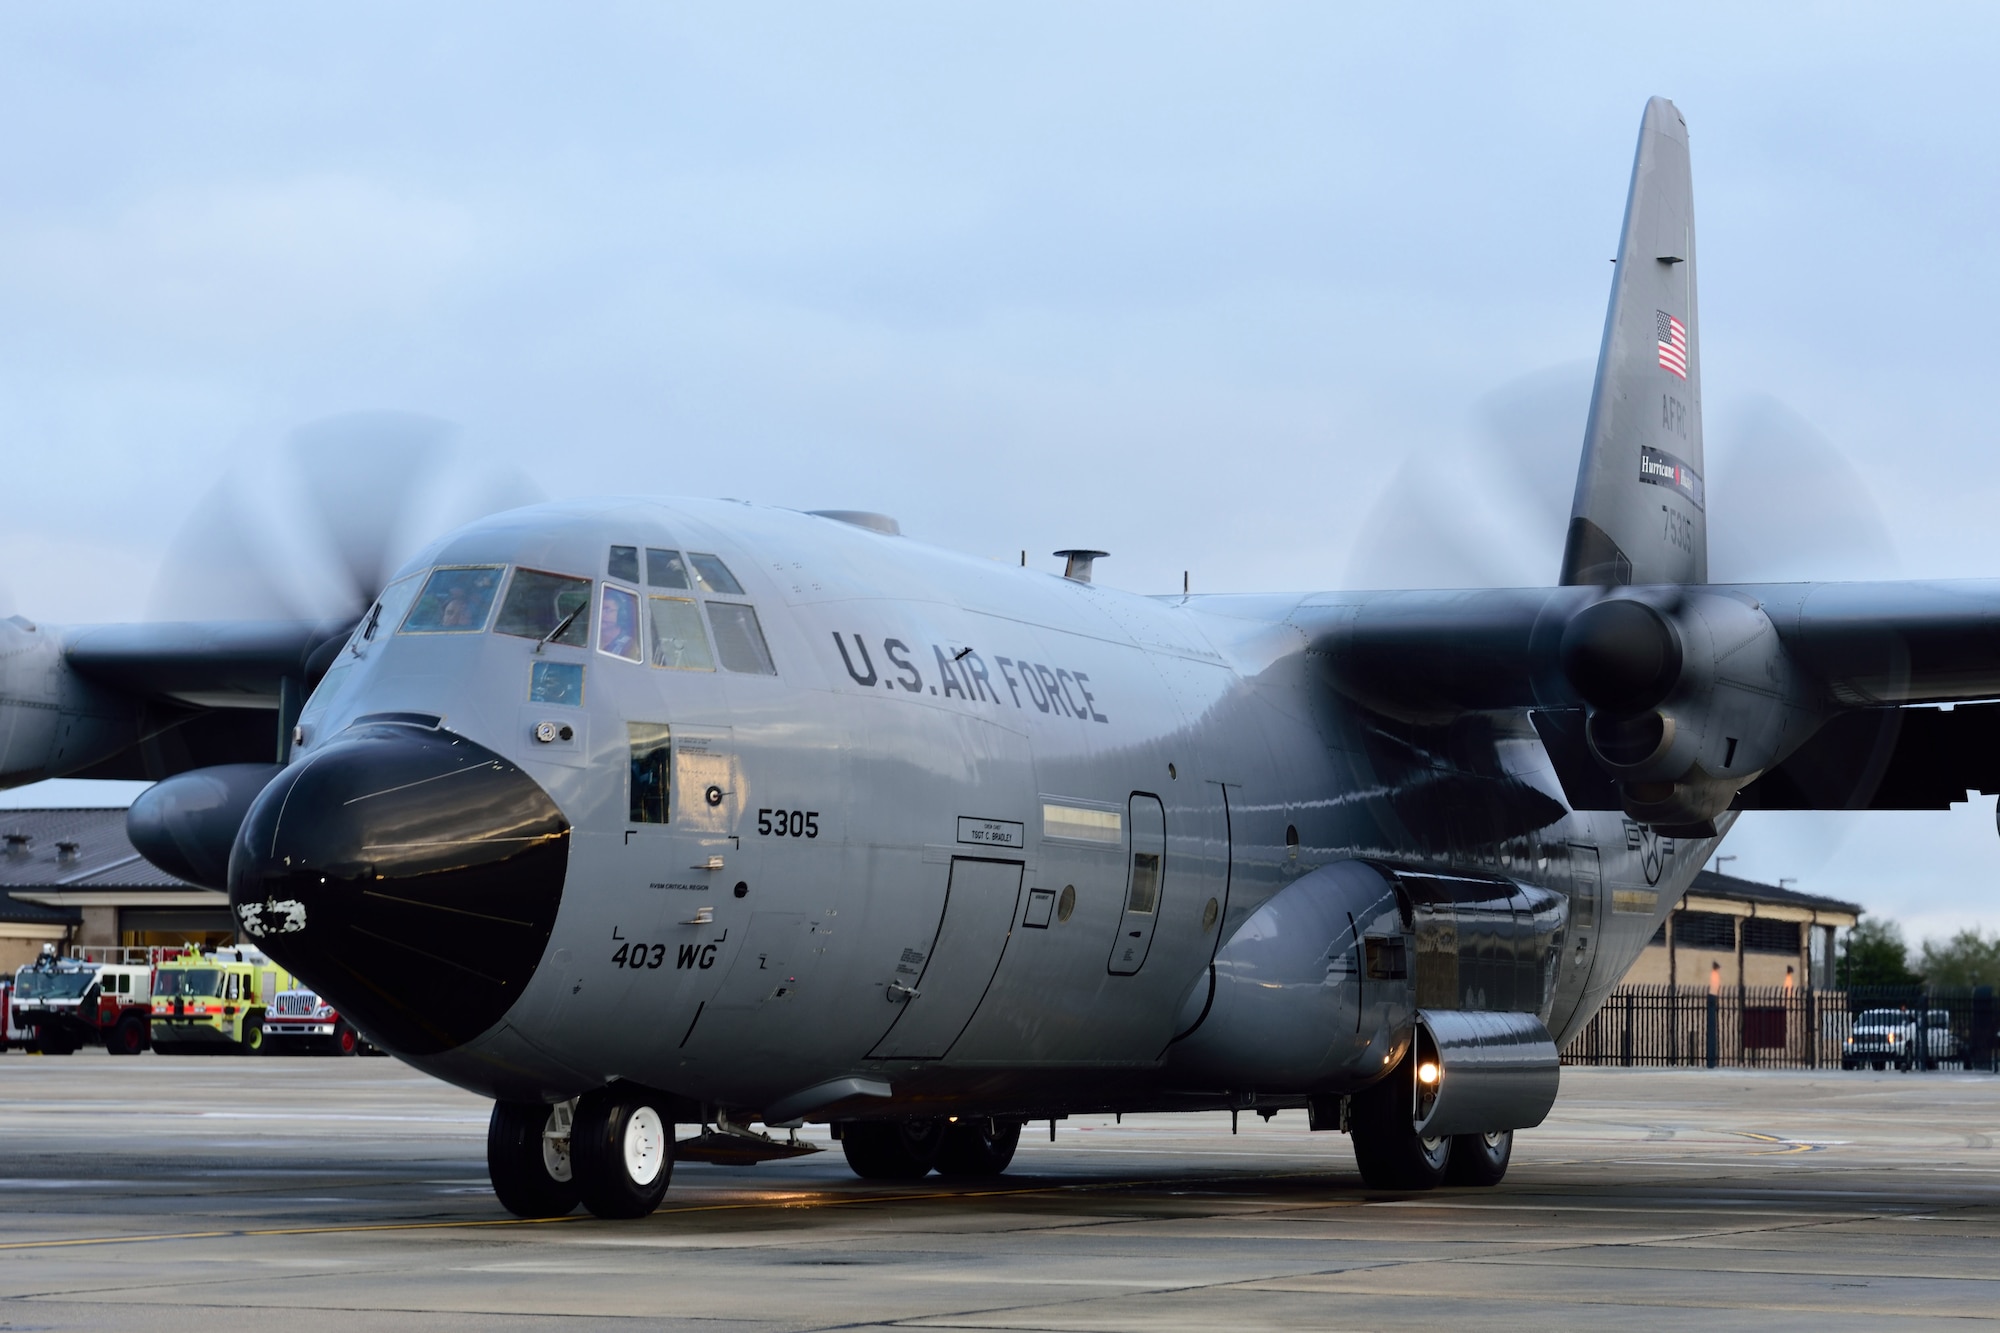 Aircrew members from the 53rd Weather Reconnaissance Squadron “Hurricane Hunters” taxi a WC-130J Super Hercules aircraft to its parking spot on the runway at Keesler Air Force Base, Mississippi, after a winter storm flight Jan. 12, 2018. In addition to their hurricane taskings, Hurricane Hunters fly winter storm missions to gather weather data used by forecasters in generating models for systems that could affect the East, West or Gulf Coast of the United States. (U.S. Air Force photo by Tech. Sgt. Ryan Labadens)